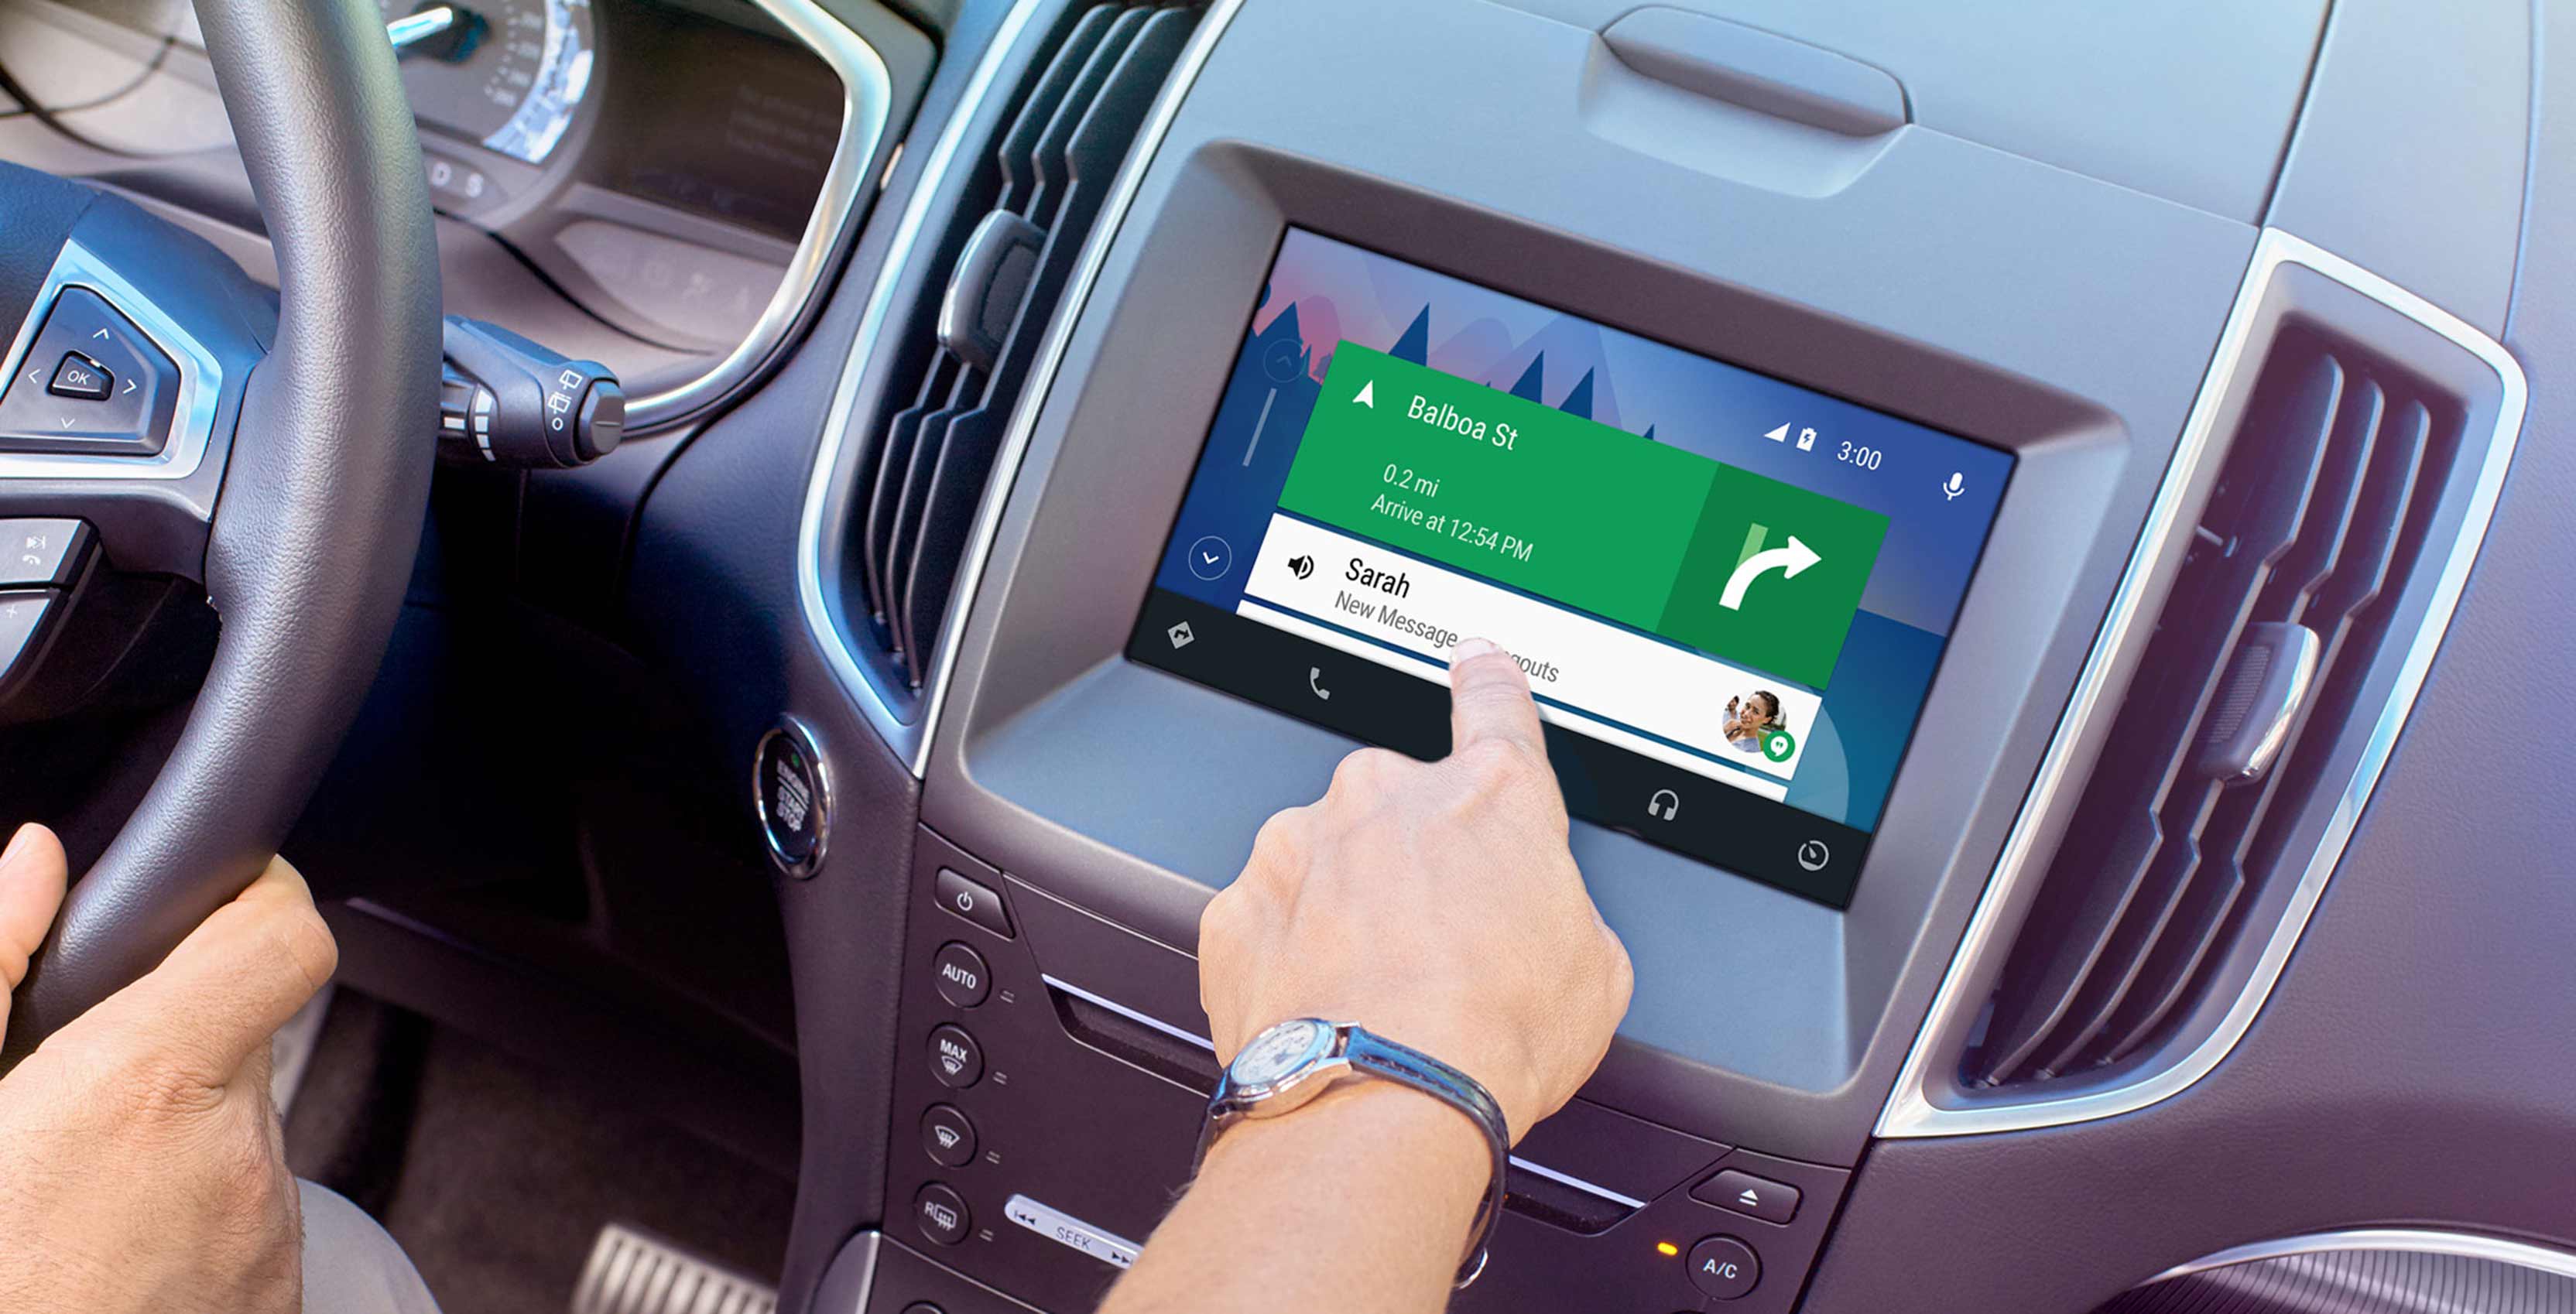 Ford Sync 3 infotainment system running Android Auto